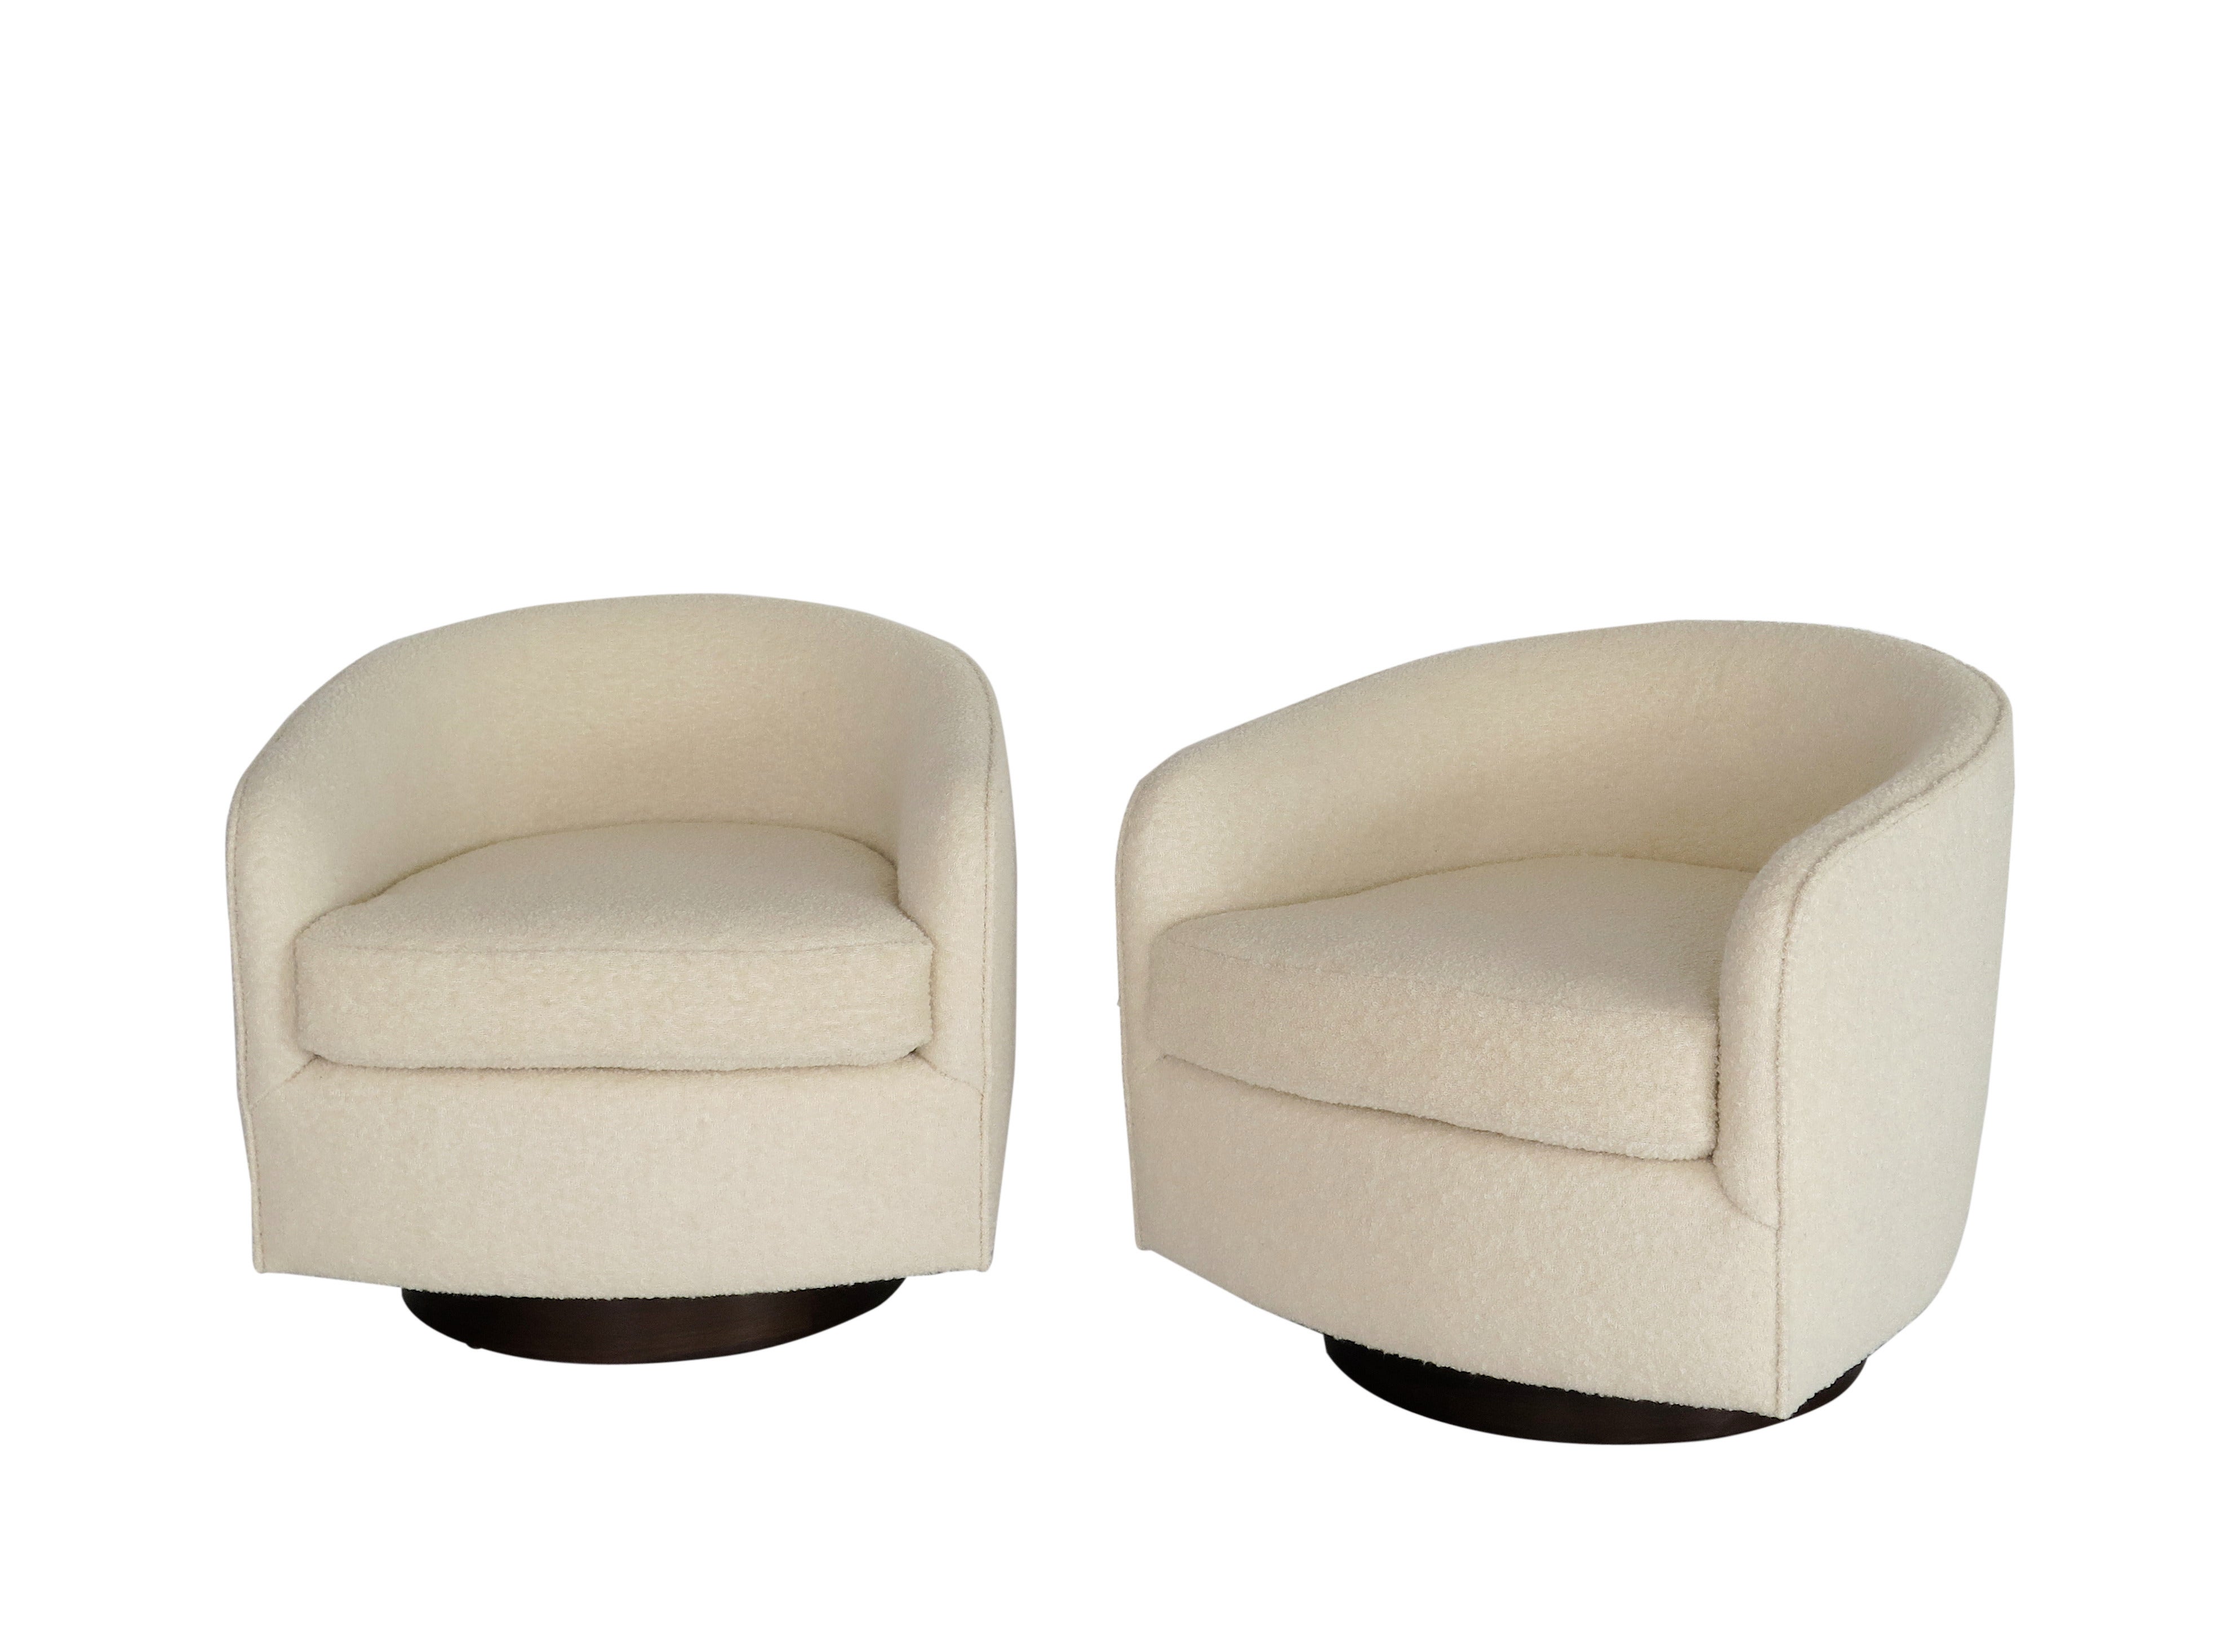 Swivel Chairs in the Style of Milo Baughman